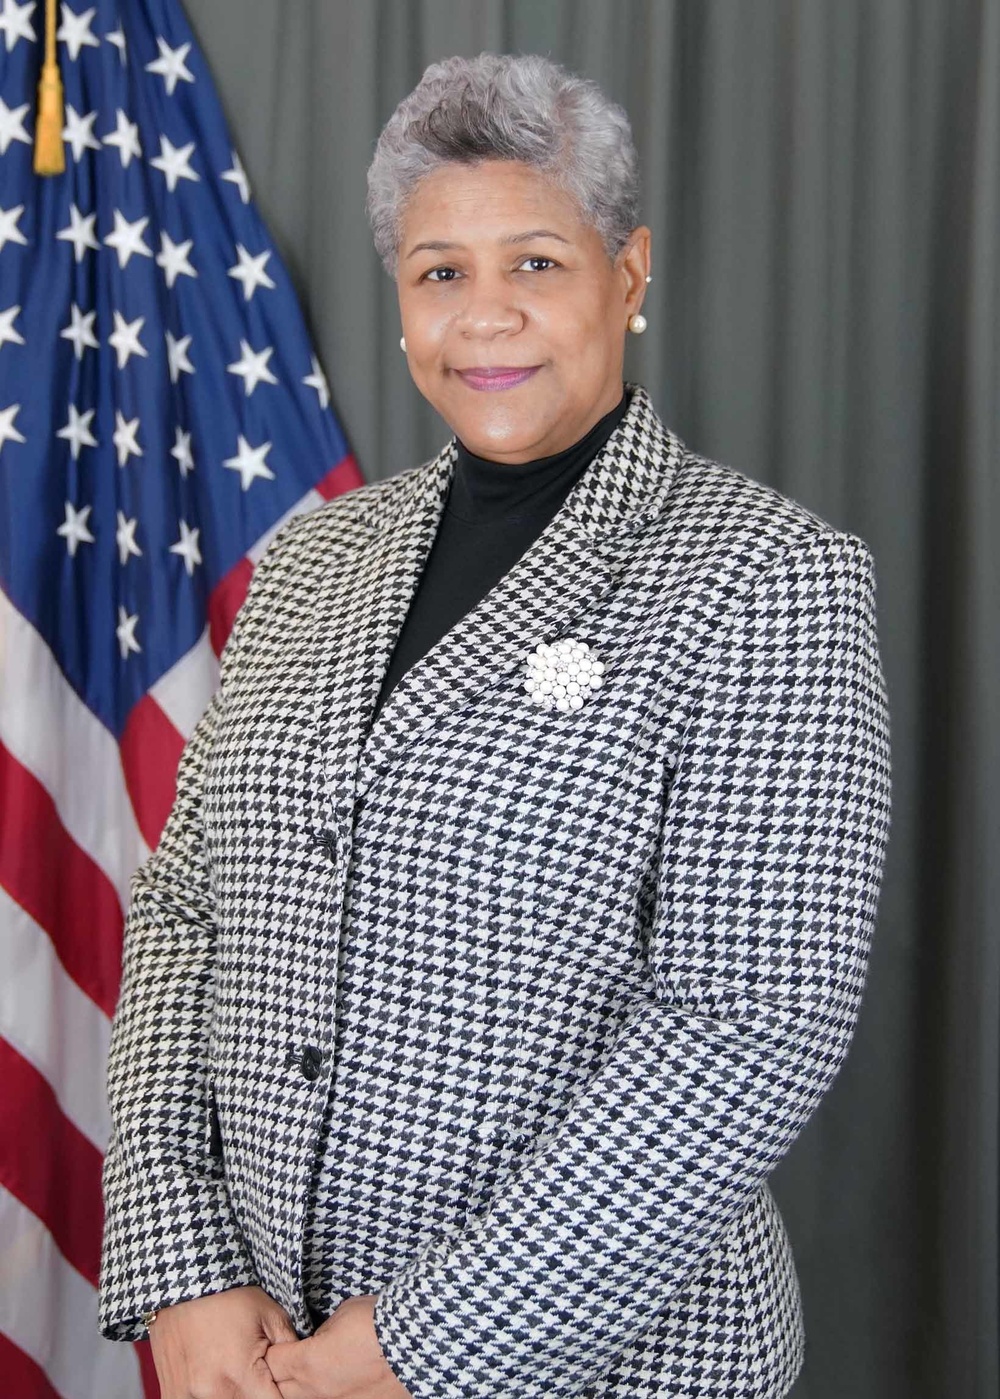 Marjorie McLaughlin contract specialist for NAVFAC Washington at Joint Base Andrews